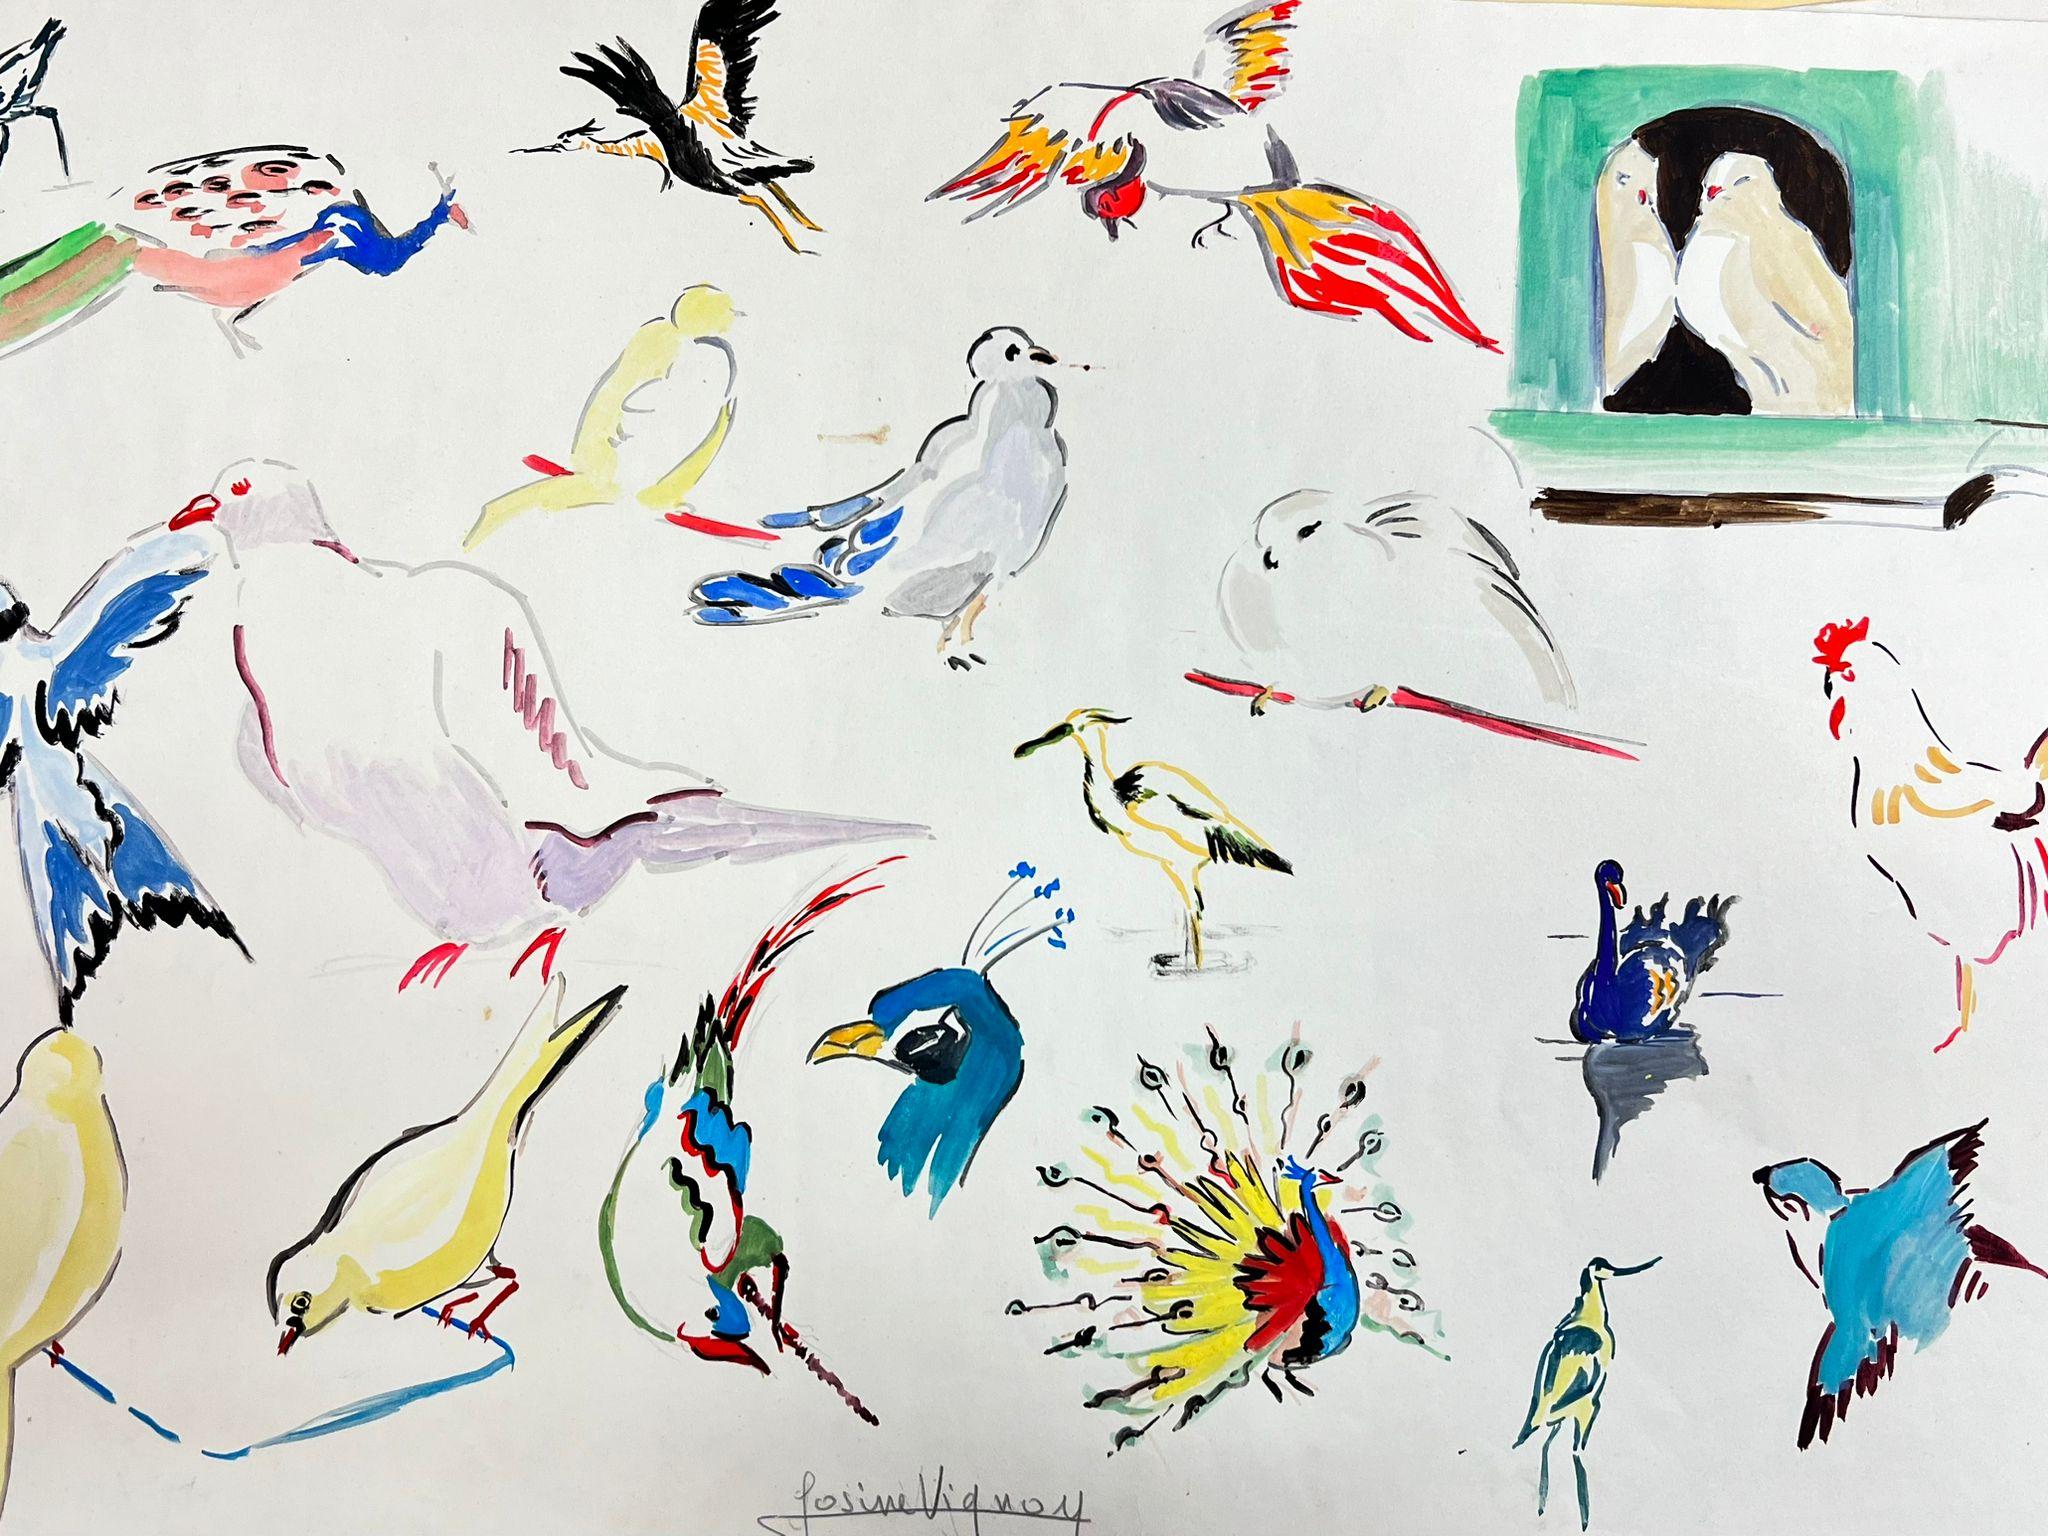 Mid Century French Illustration Sketches Of Different Colorful Birds - Painting by Josine Vignon